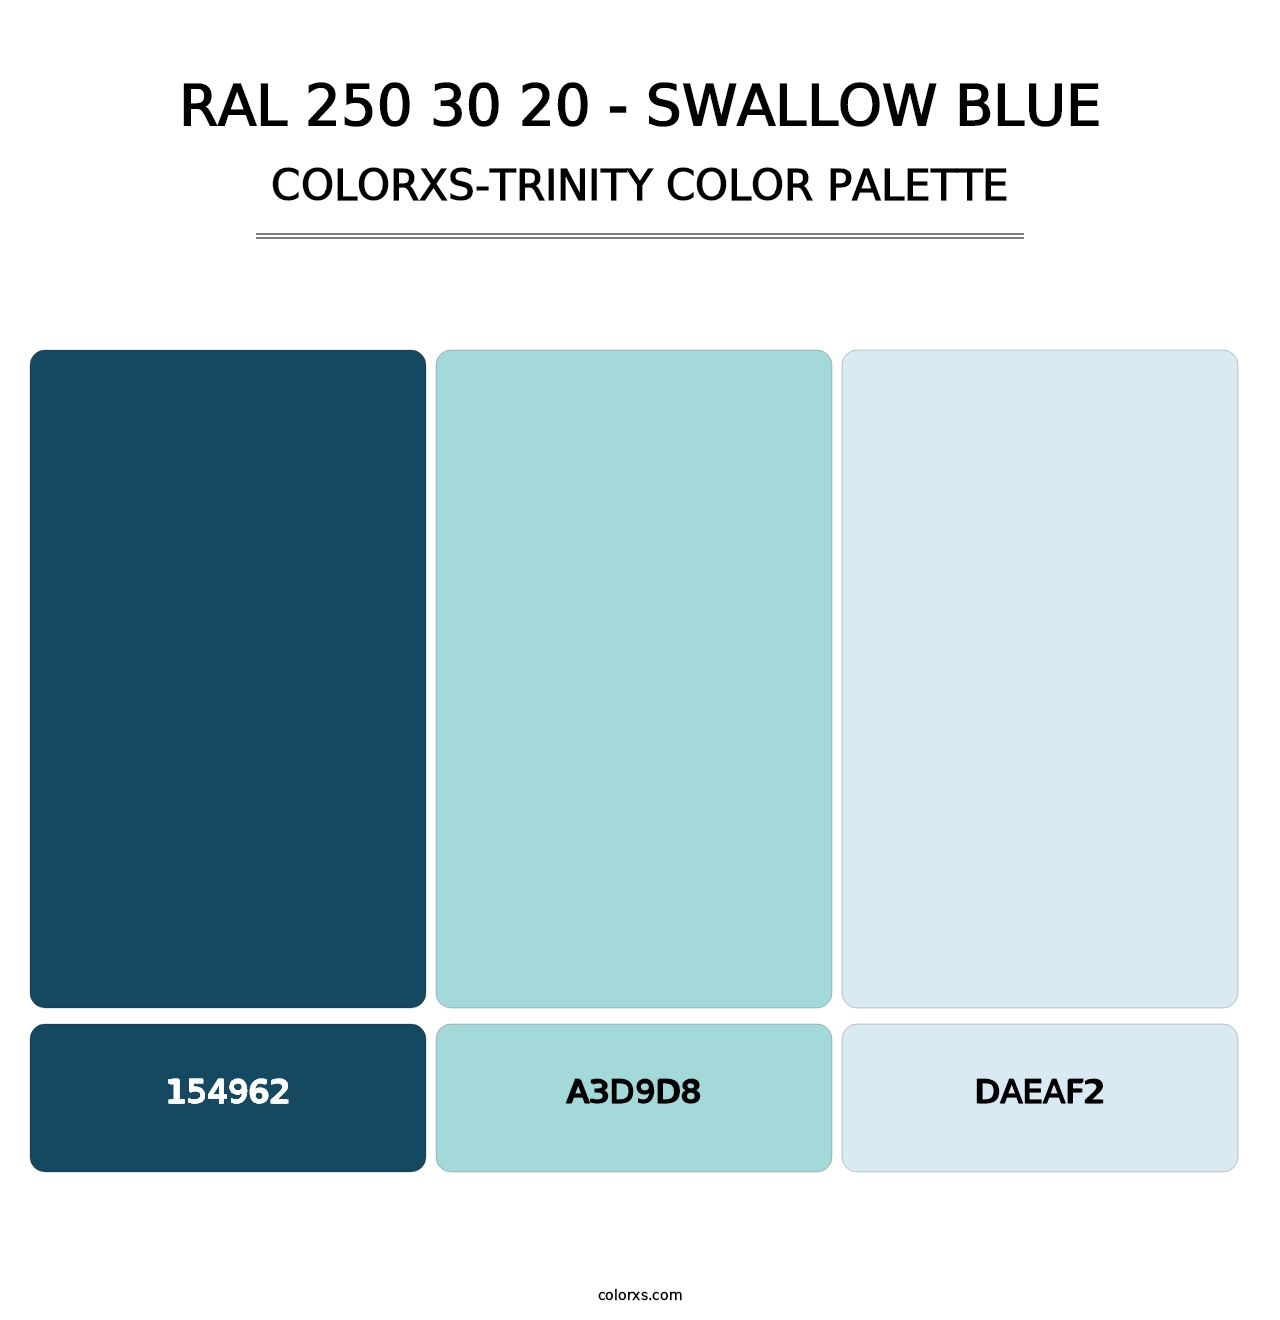 RAL 250 30 20 - Swallow Blue - Colorxs Trinity Palette